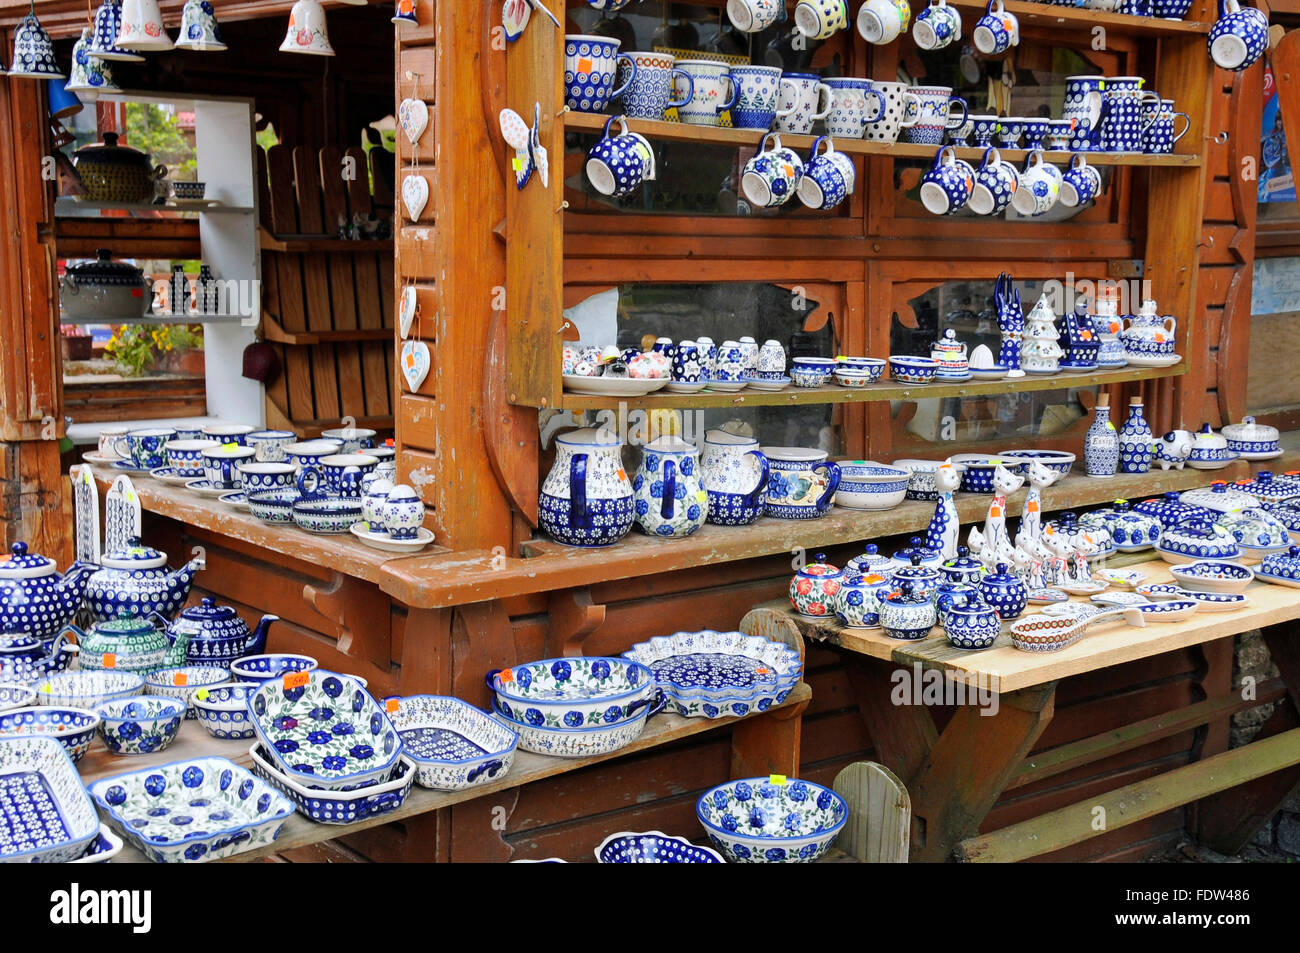 Ceramics pottery earthenware colourful from Boleslawiec at a market stall in Karpacz, Poland Stock Photo